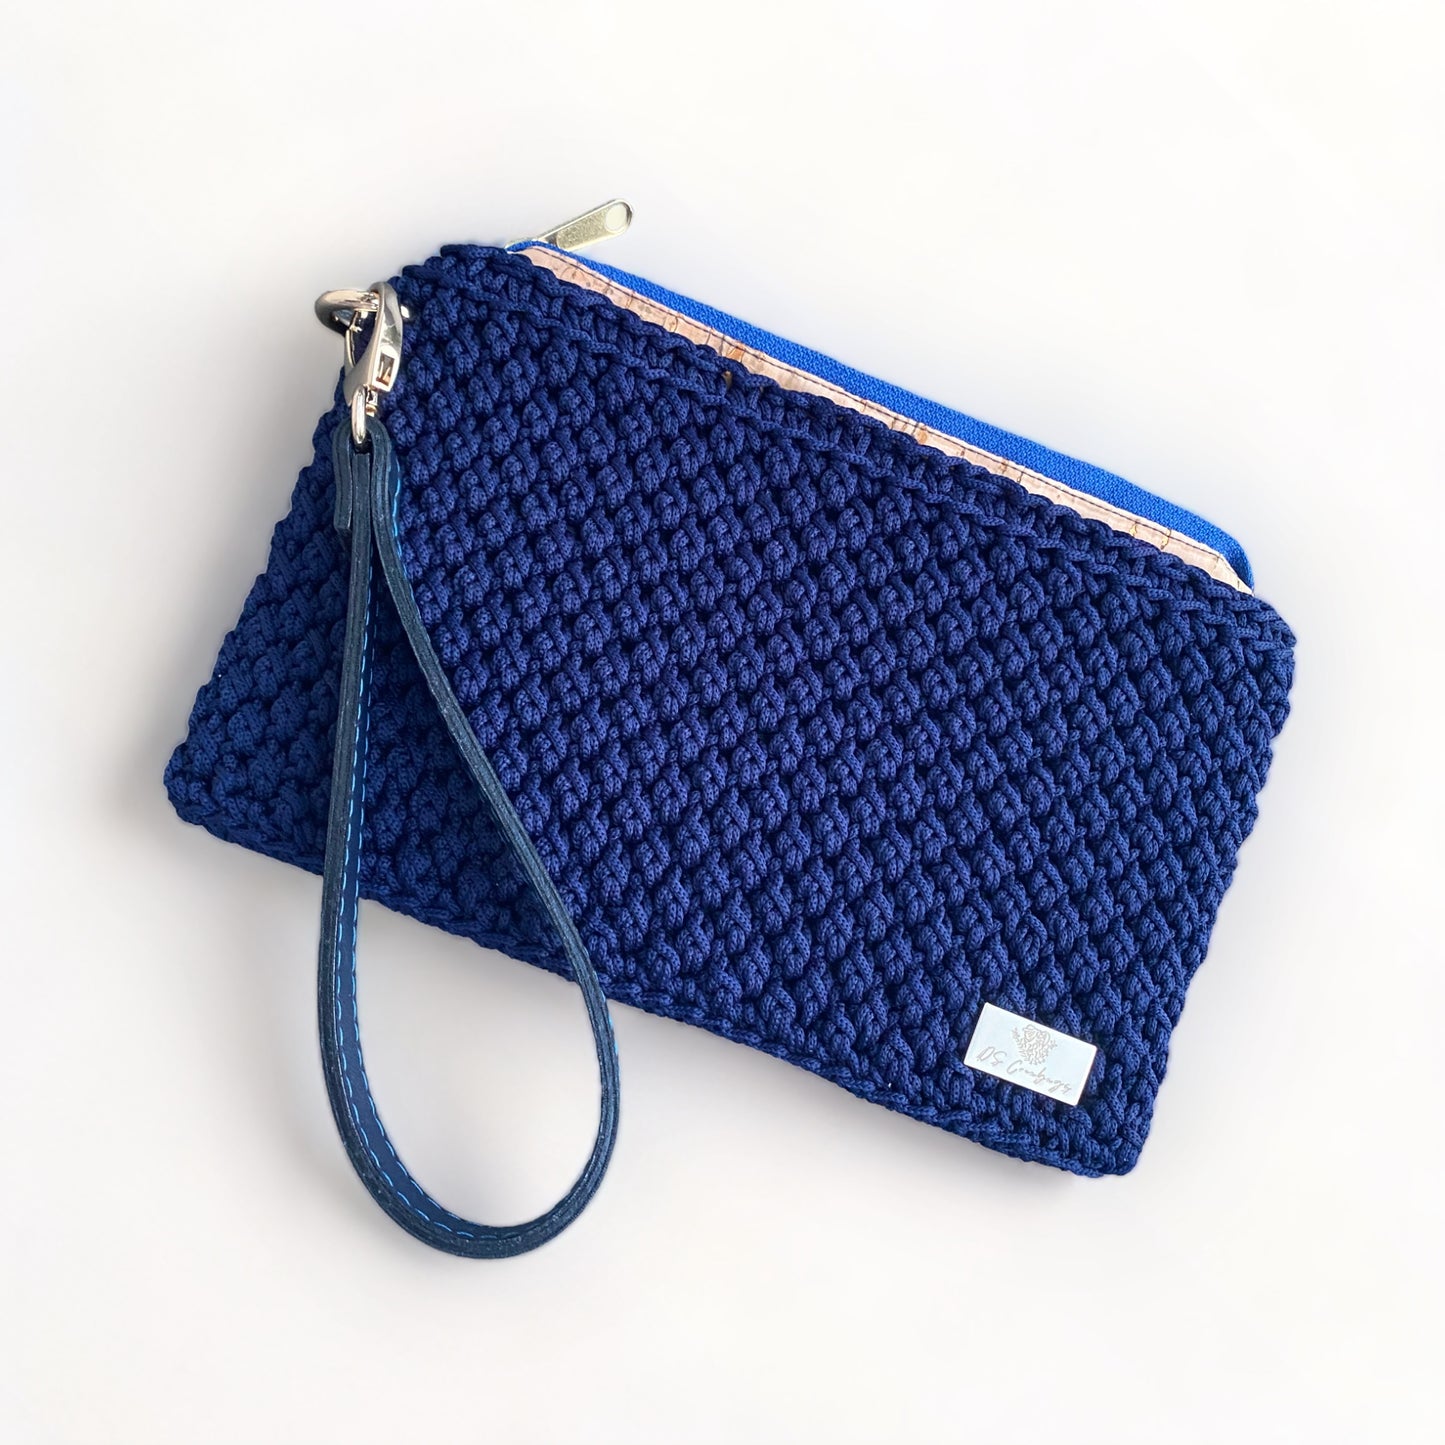 Chic clutch for any occasion